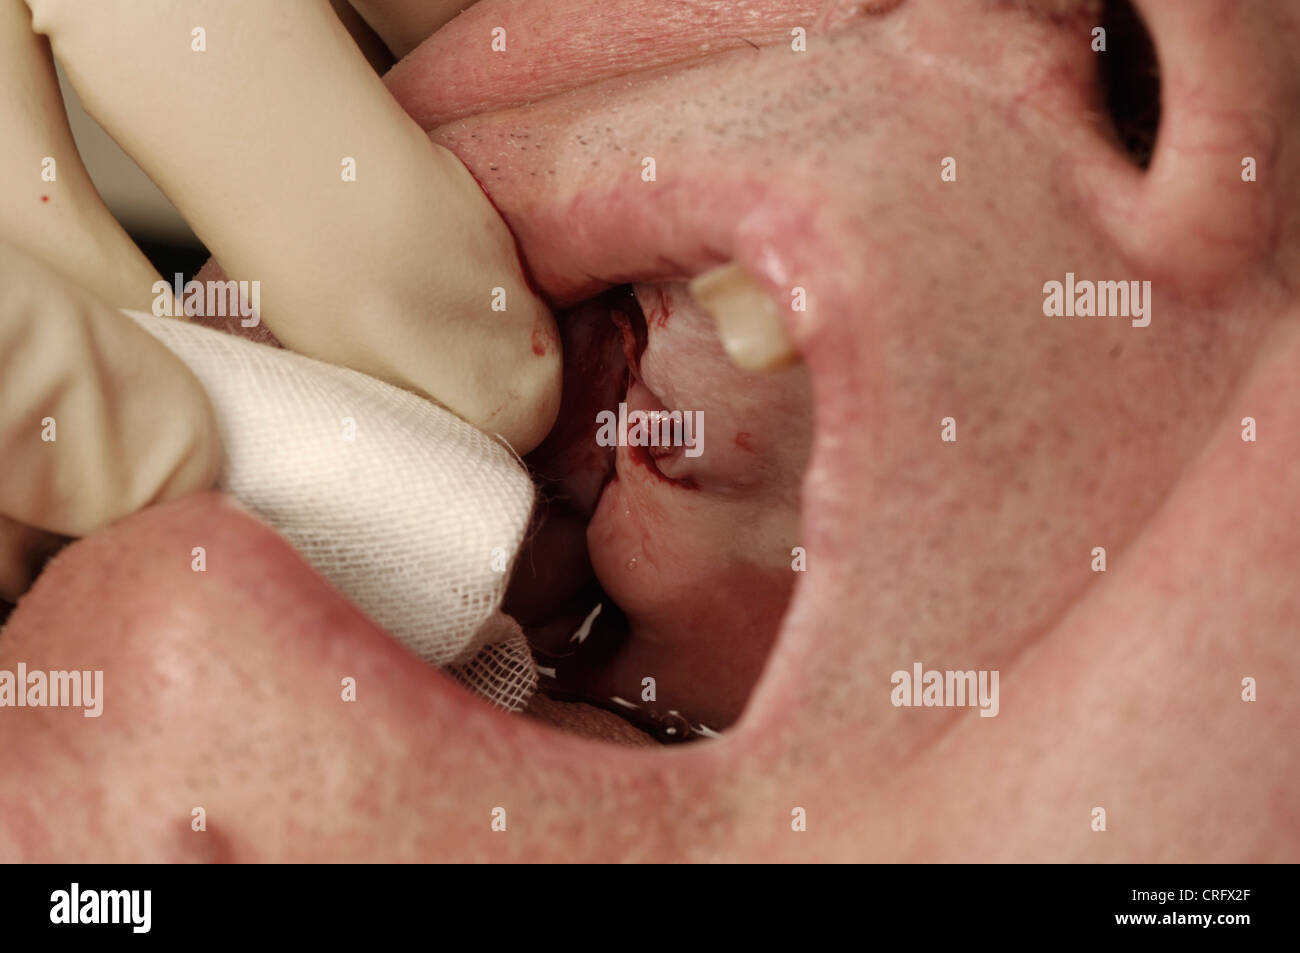 A dentist cleans a bleeding gum with a small gauze after a tooth extraction. Stock Photo